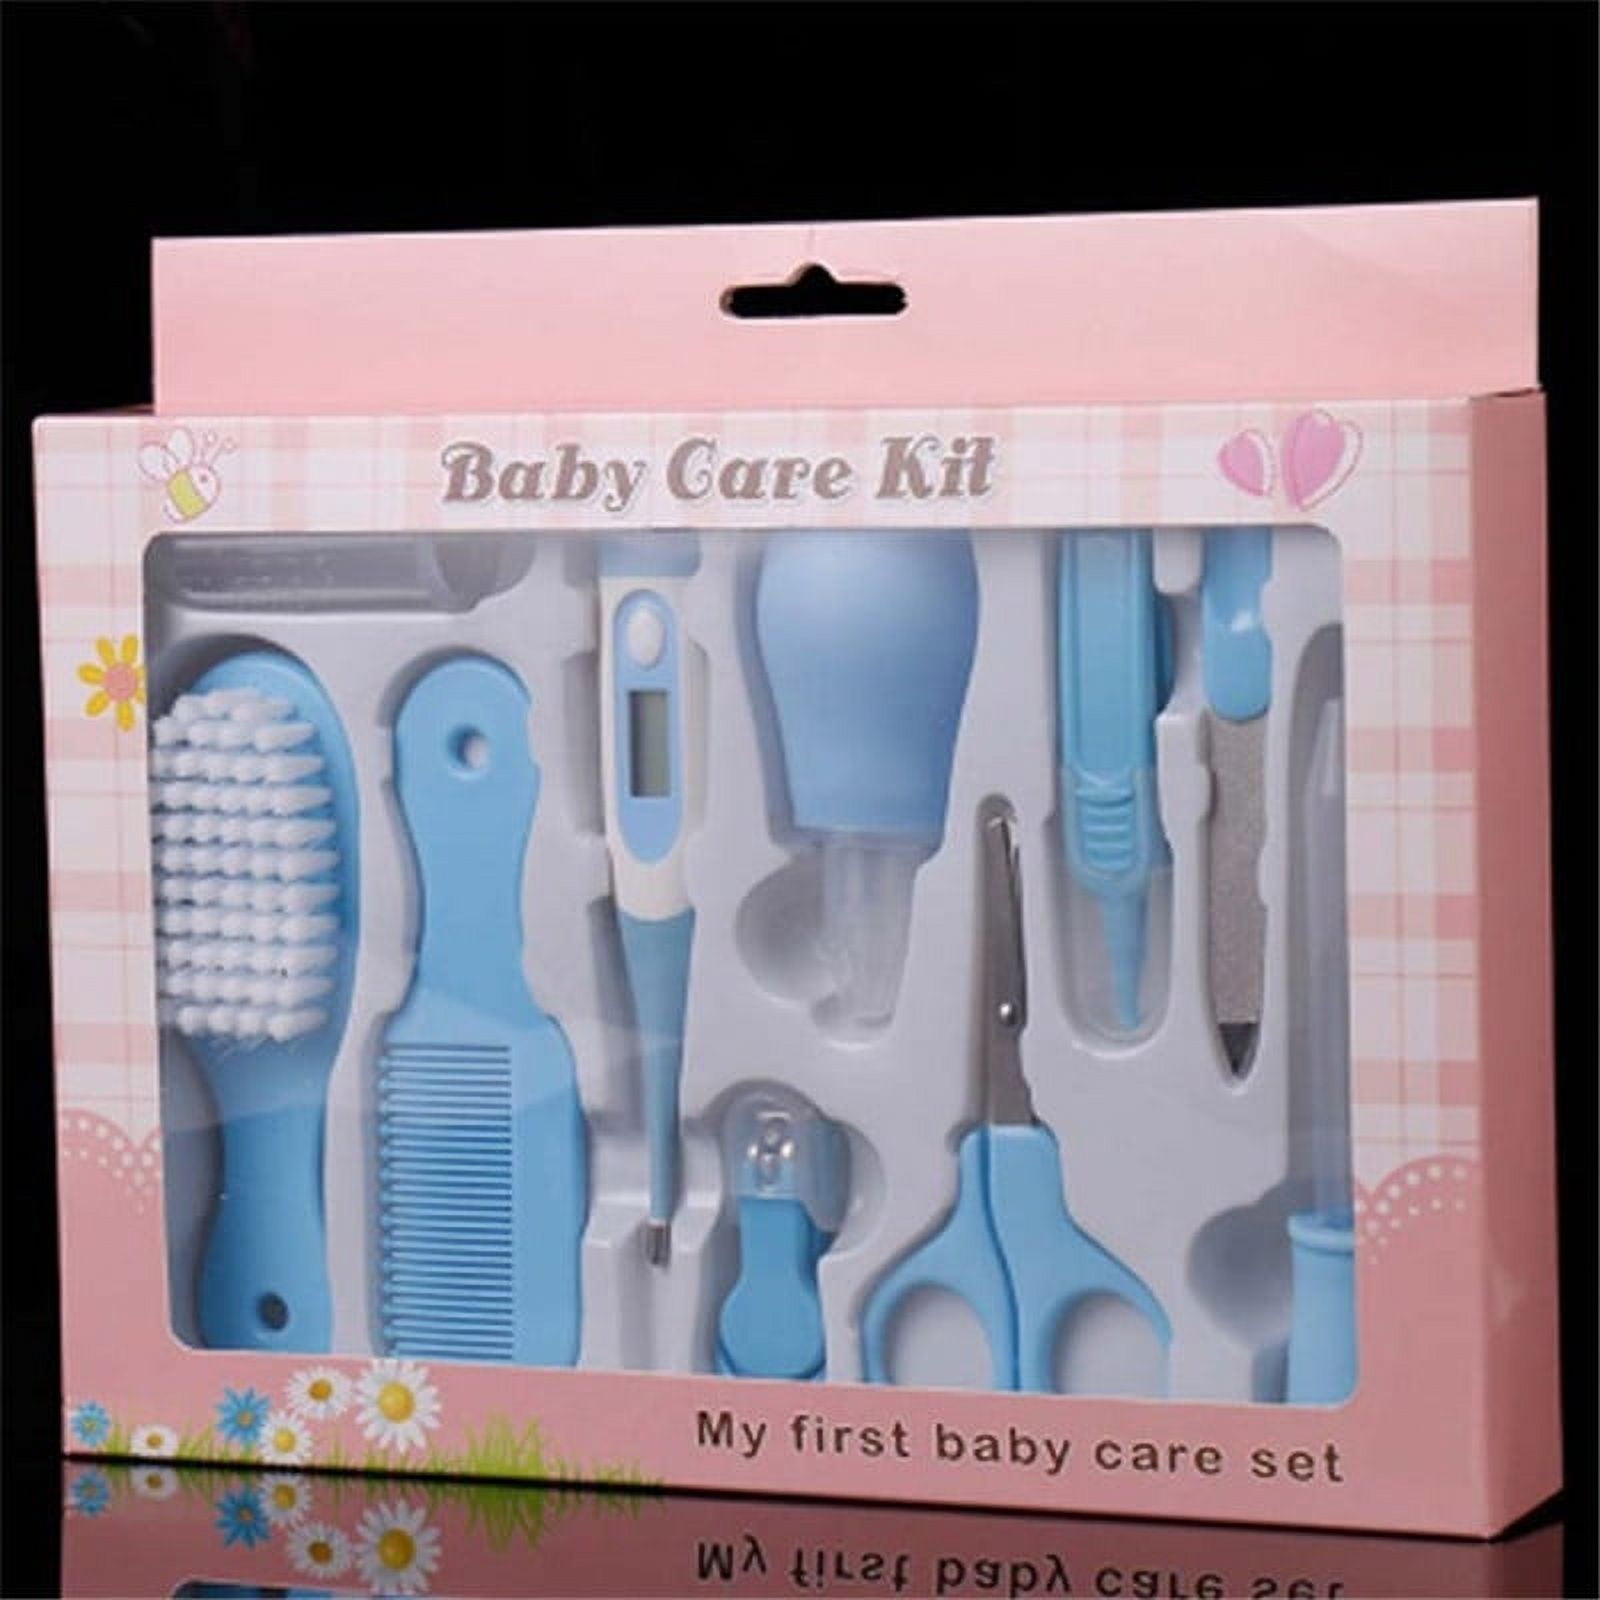 Amazon.com : 19 in 1 Baby Grooming Kit,Newborn Nursery Health Care Set  Include Hair Brush Comb Finger Toothbrush,Nail Clippers,Nasal Aspirator,Ear  Cleaner,etc. for Infant Toddlers Boys Girls Kids(Blue) : Baby